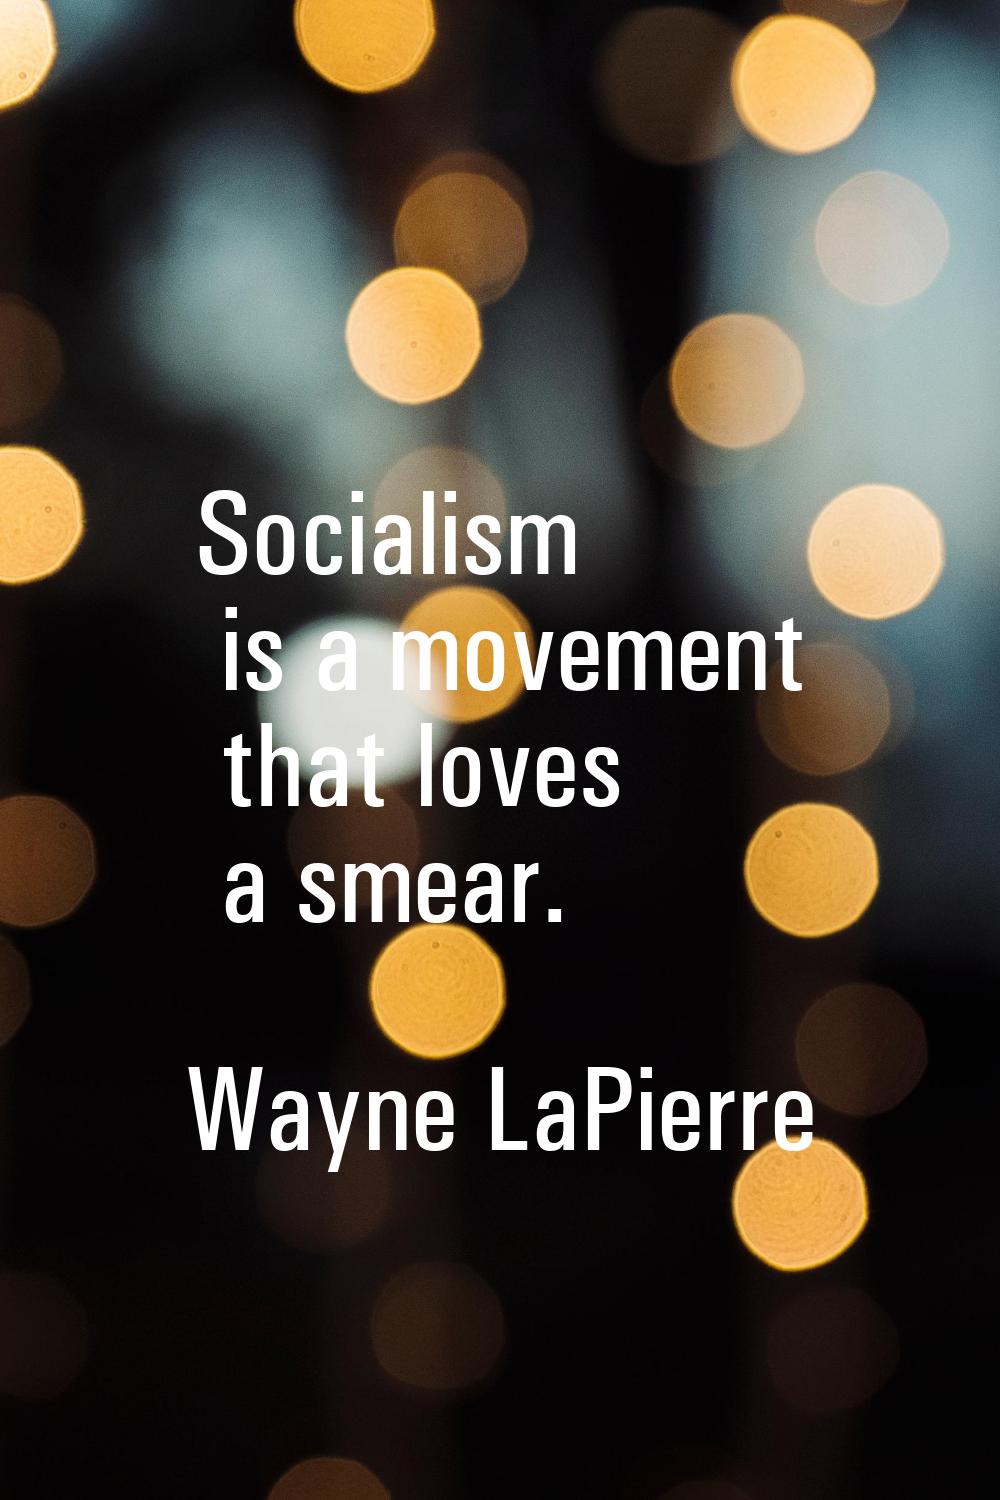 Socialism is a movement that loves a smear.